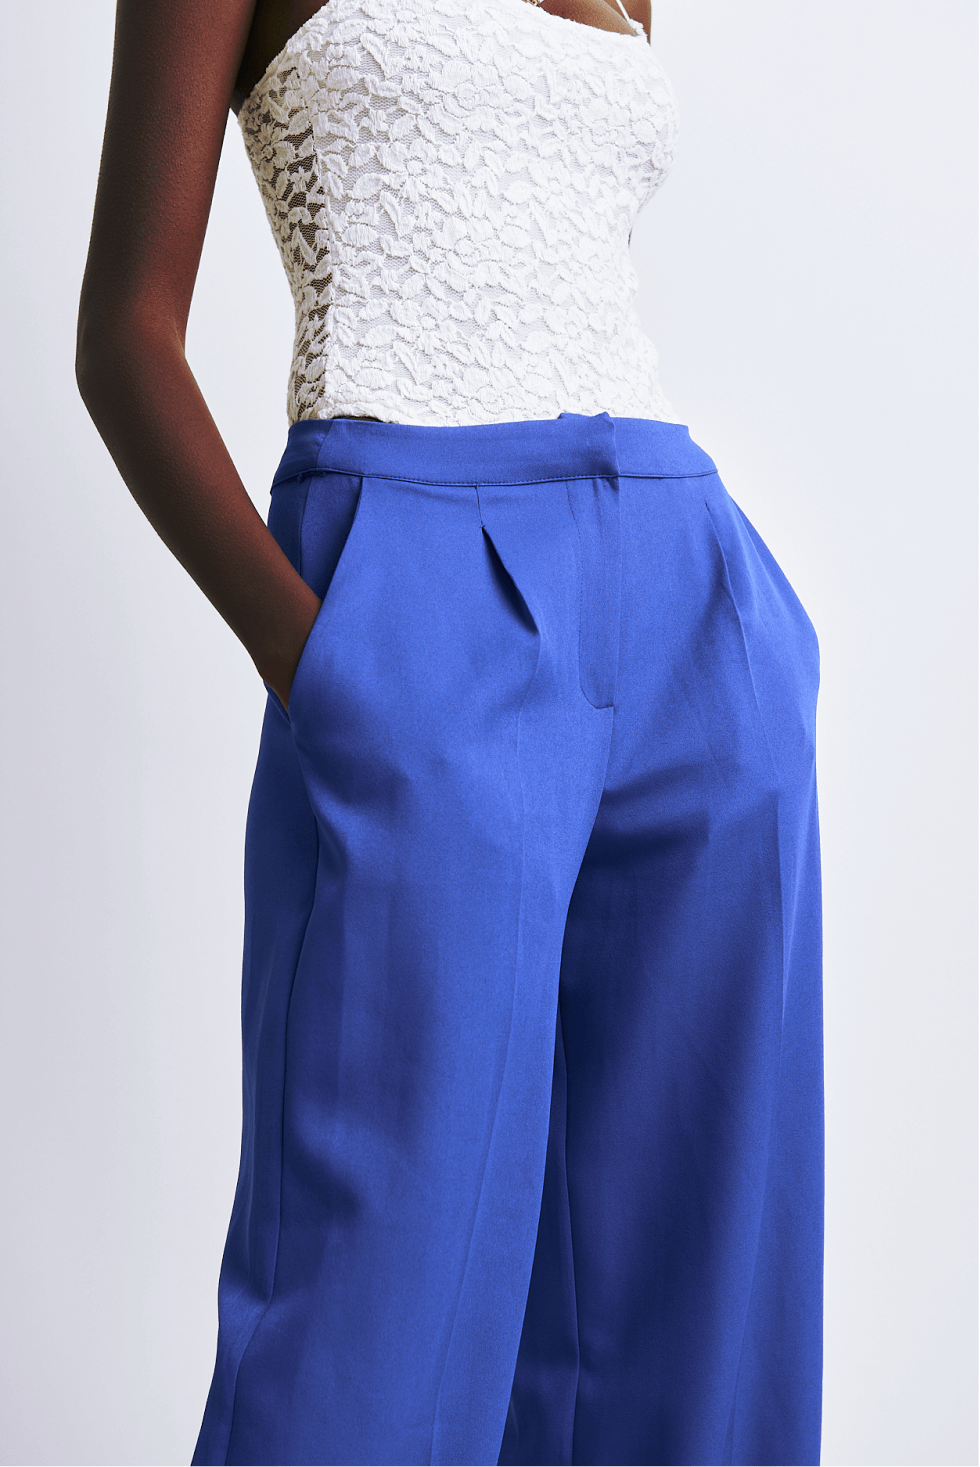 Royal Blue Palazzo Pants - Trousers, Pants & Shorts by The Fashion Frenzy. Shop on Arrai now! From top to bottom, we've got you covered with this season's perfect pair of full length official trousers. Mix, match and switch it up with stylish separates th